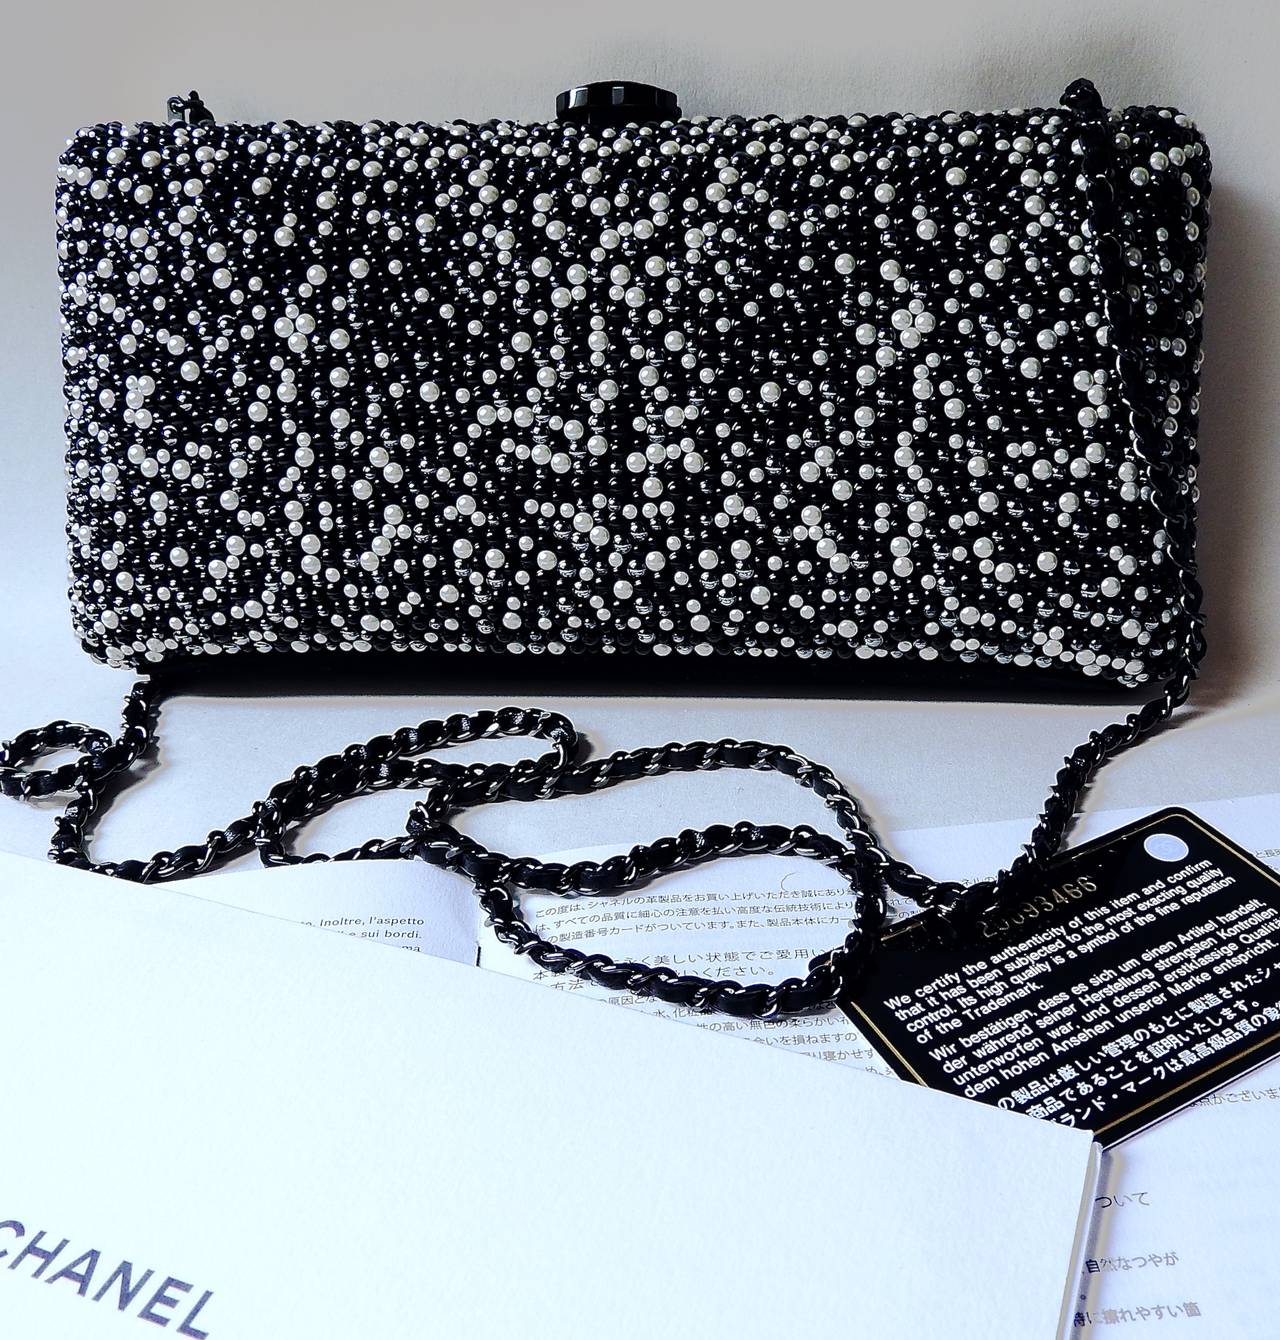 This Chanel pearled chain clutch bag is from 2014 Pre-Fall collection. 
Sumptuously embellished with finest quality of grey and creamy white pearls and black beads. 
Soft lambskin lining with suede leather bottom.
3 toned pearls give this clutch